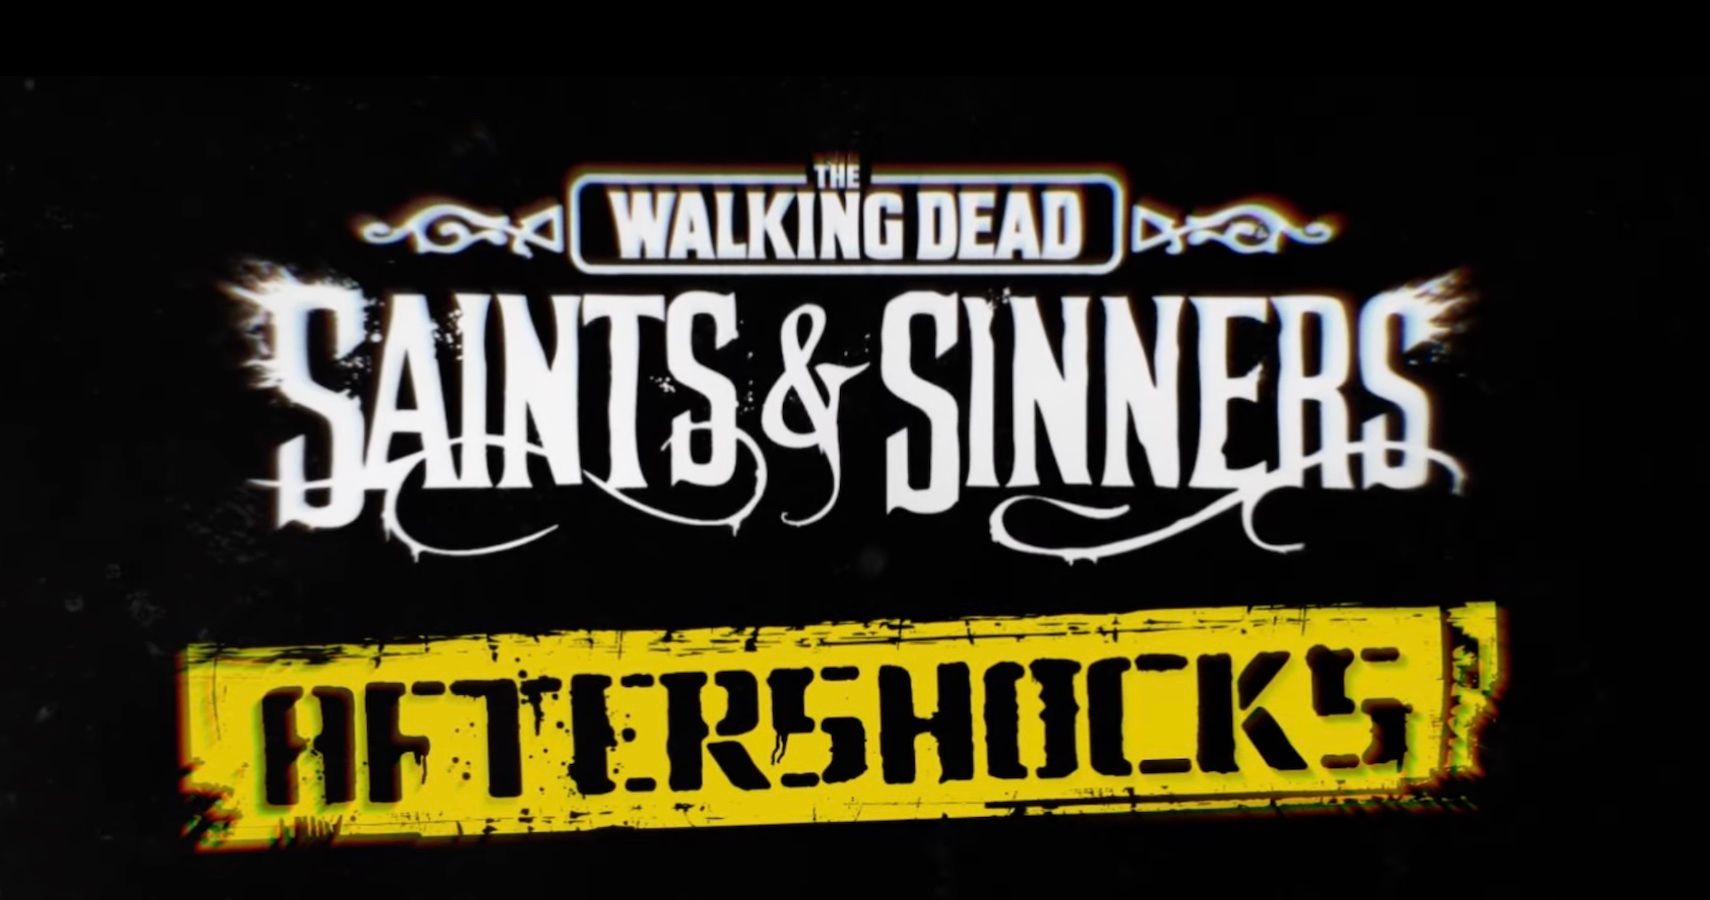 The Walking Dead Saints and Sinners Aftershocks